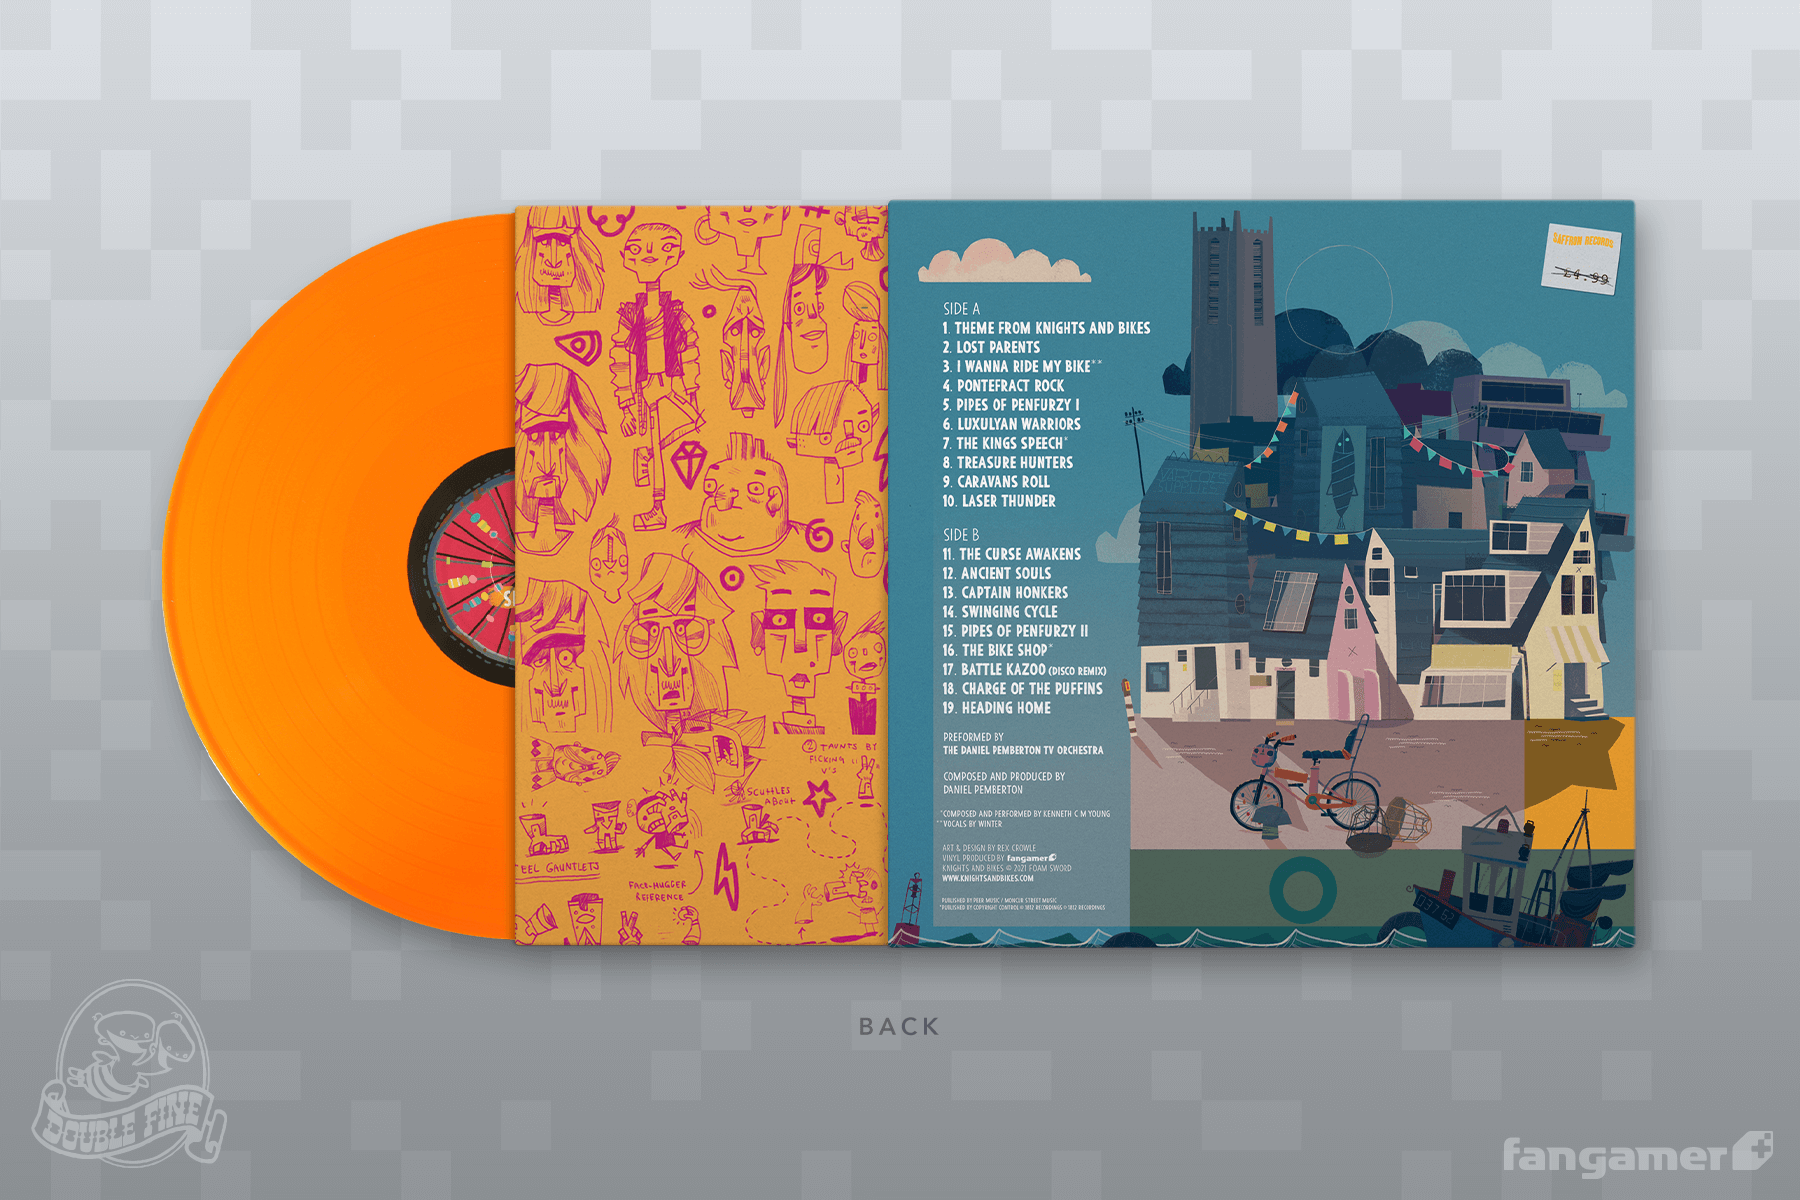 Knights and Bikes Soundtrack on Orange Vinyl with Back Sleeve